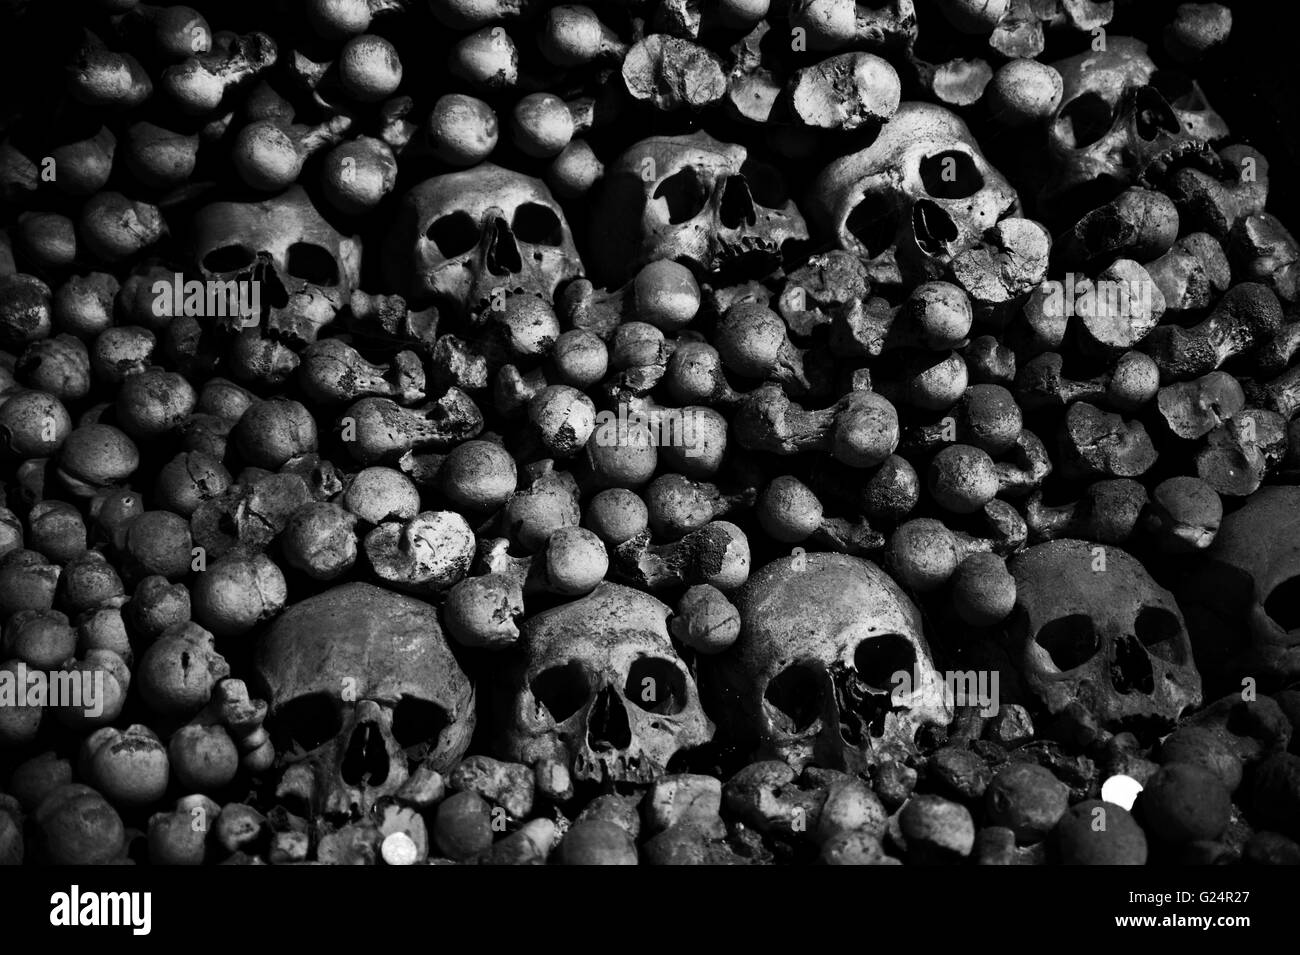 crazy scary collection of skull and bones Stock Photo